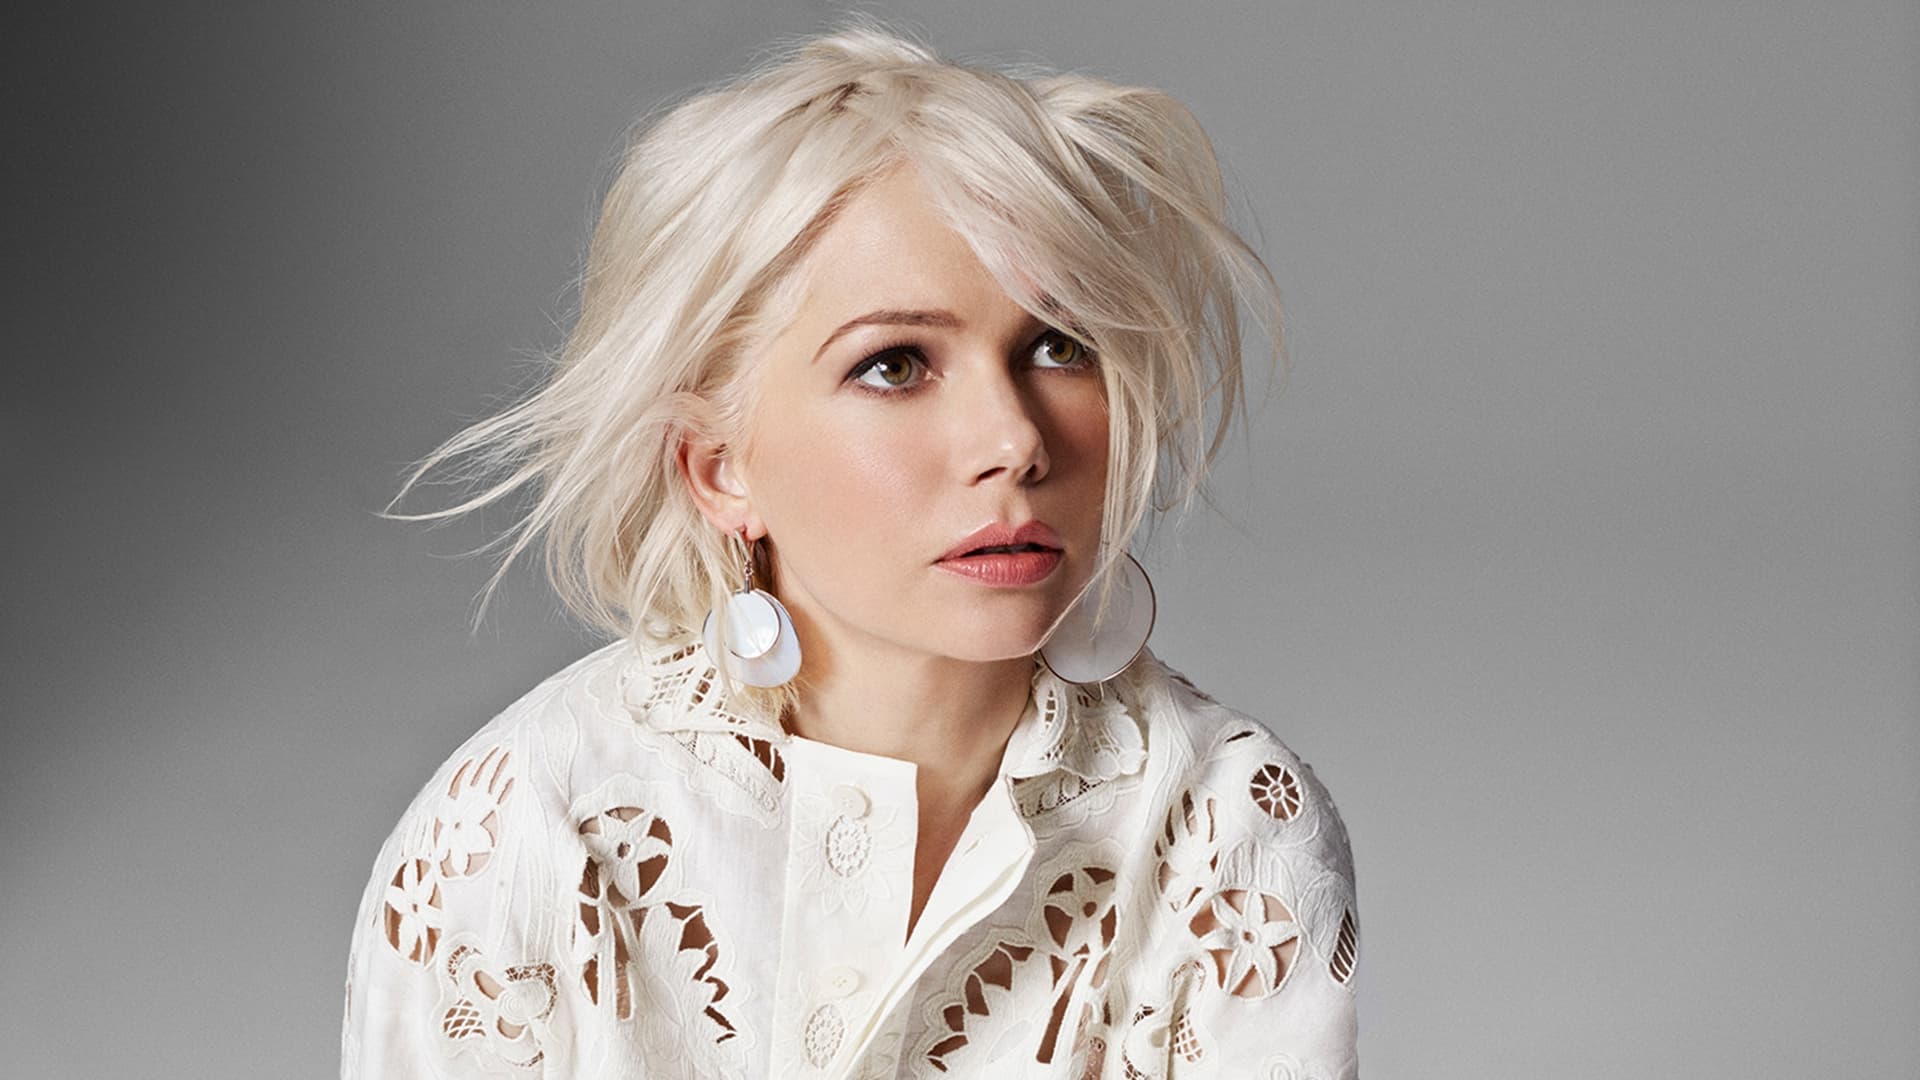 Michelle Williams Actress Blonde Earrings 1920x1080